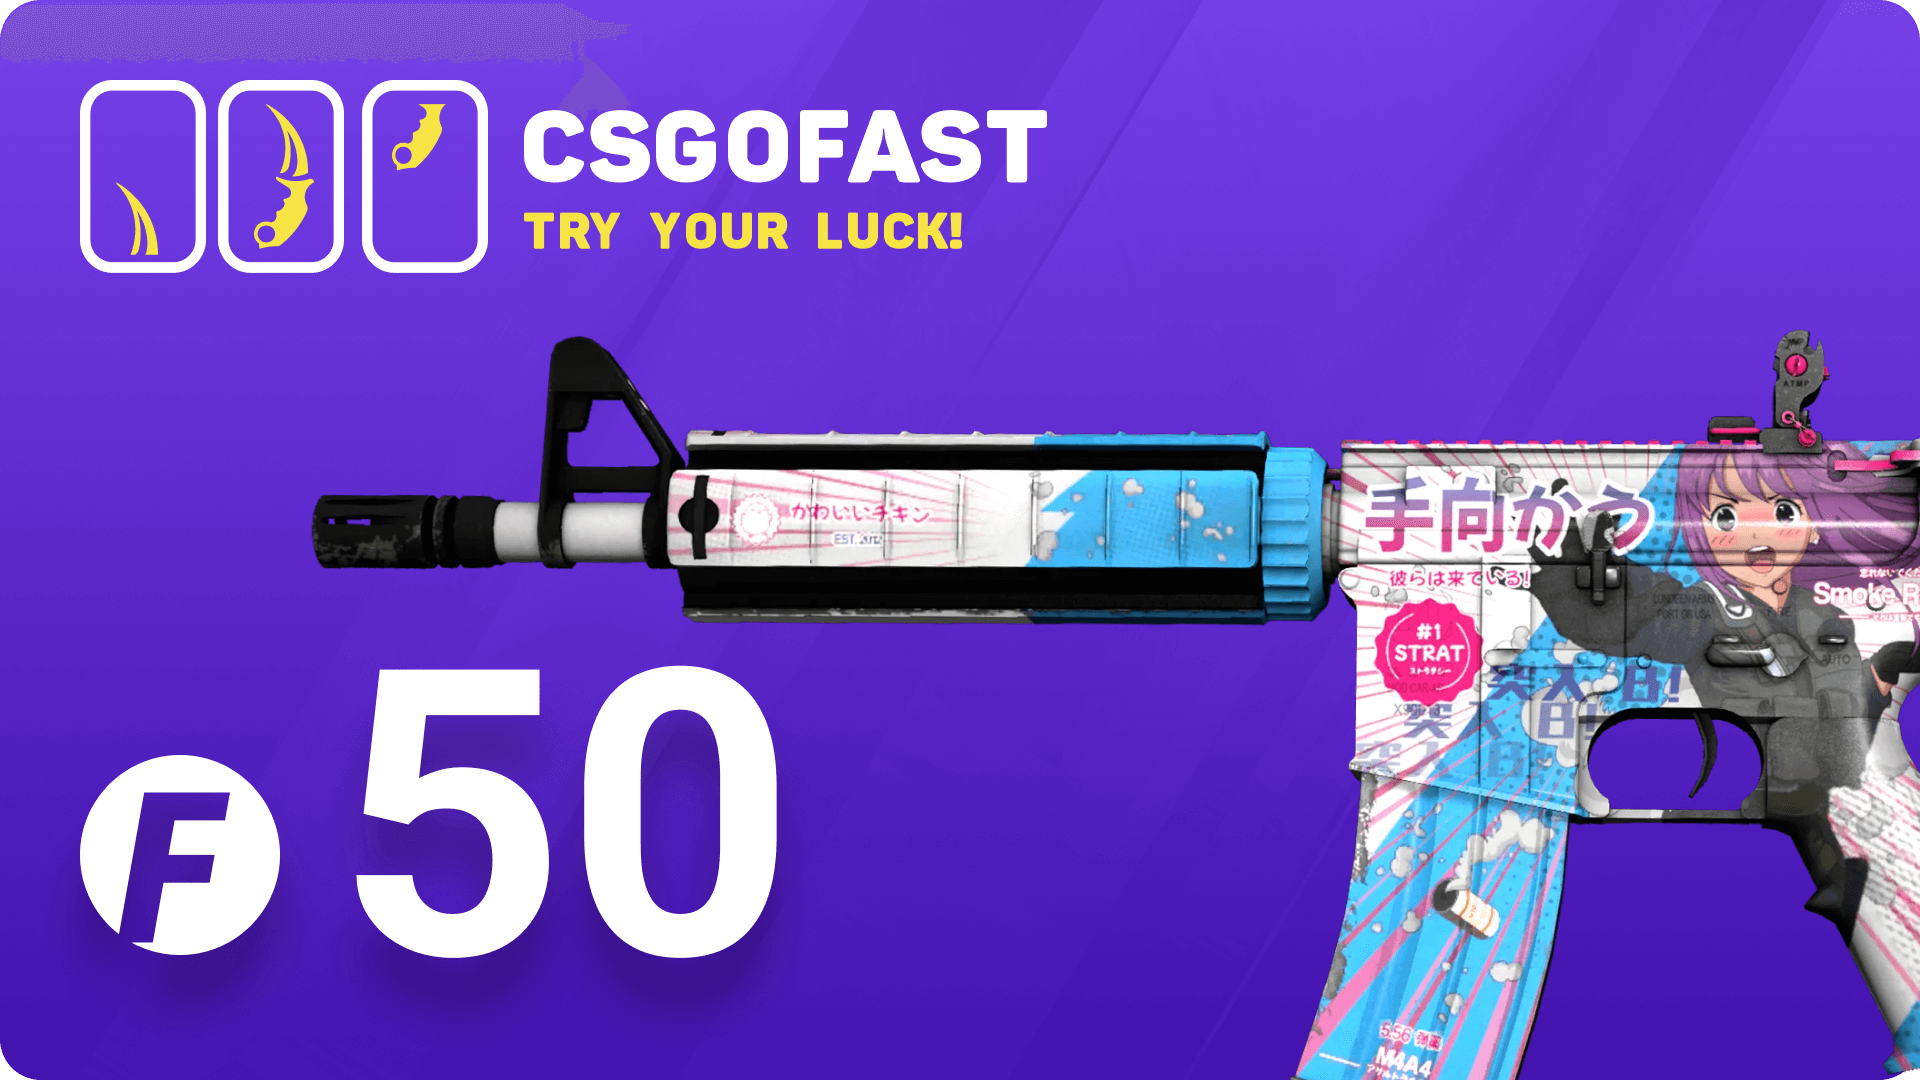 [$ 35.48] CSGOFAST 50 Fast Coins Gift Card